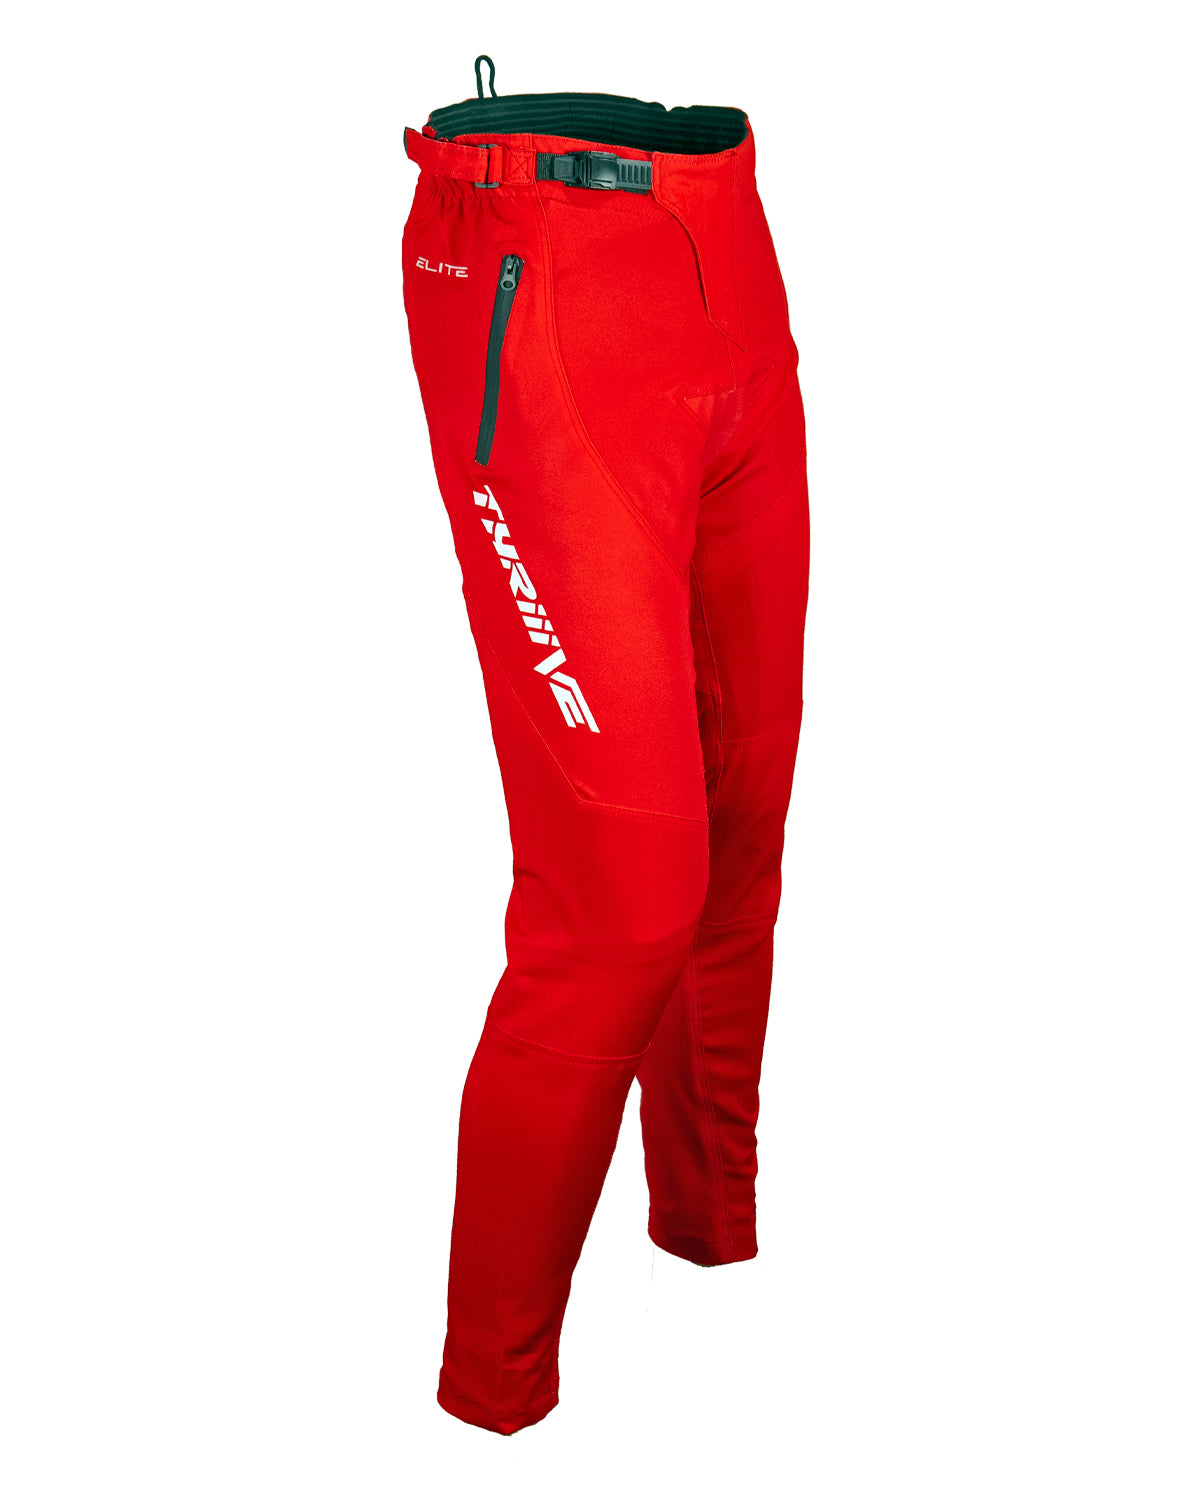 Elite Stretch Race Pants - Red